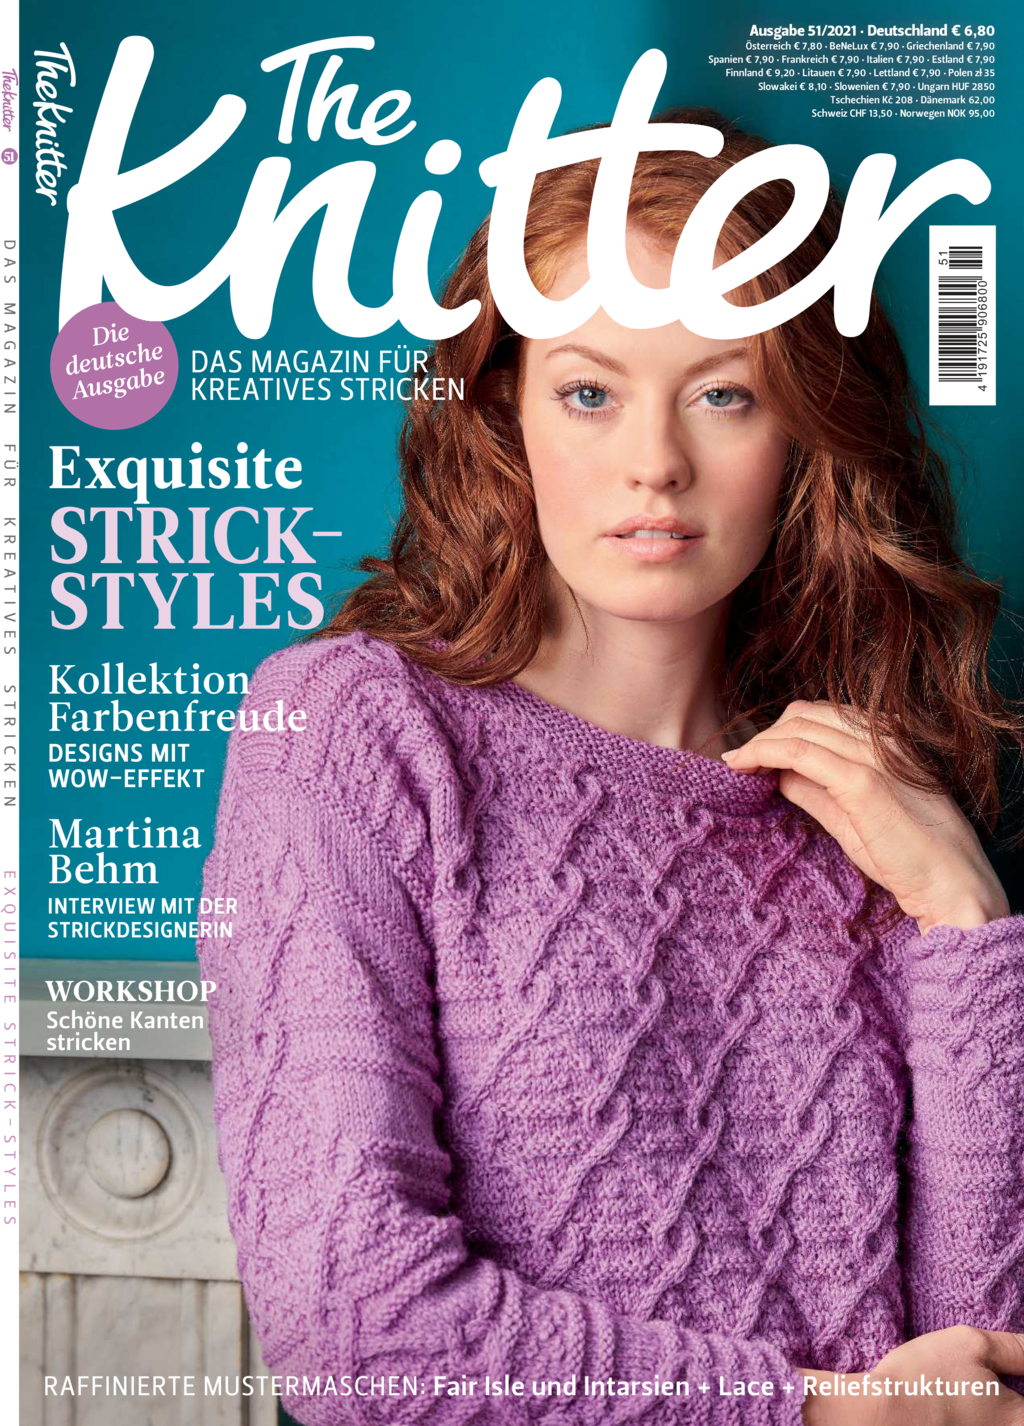 The Knitter Nr. 51/2021 - Exquisite Strick-Styles